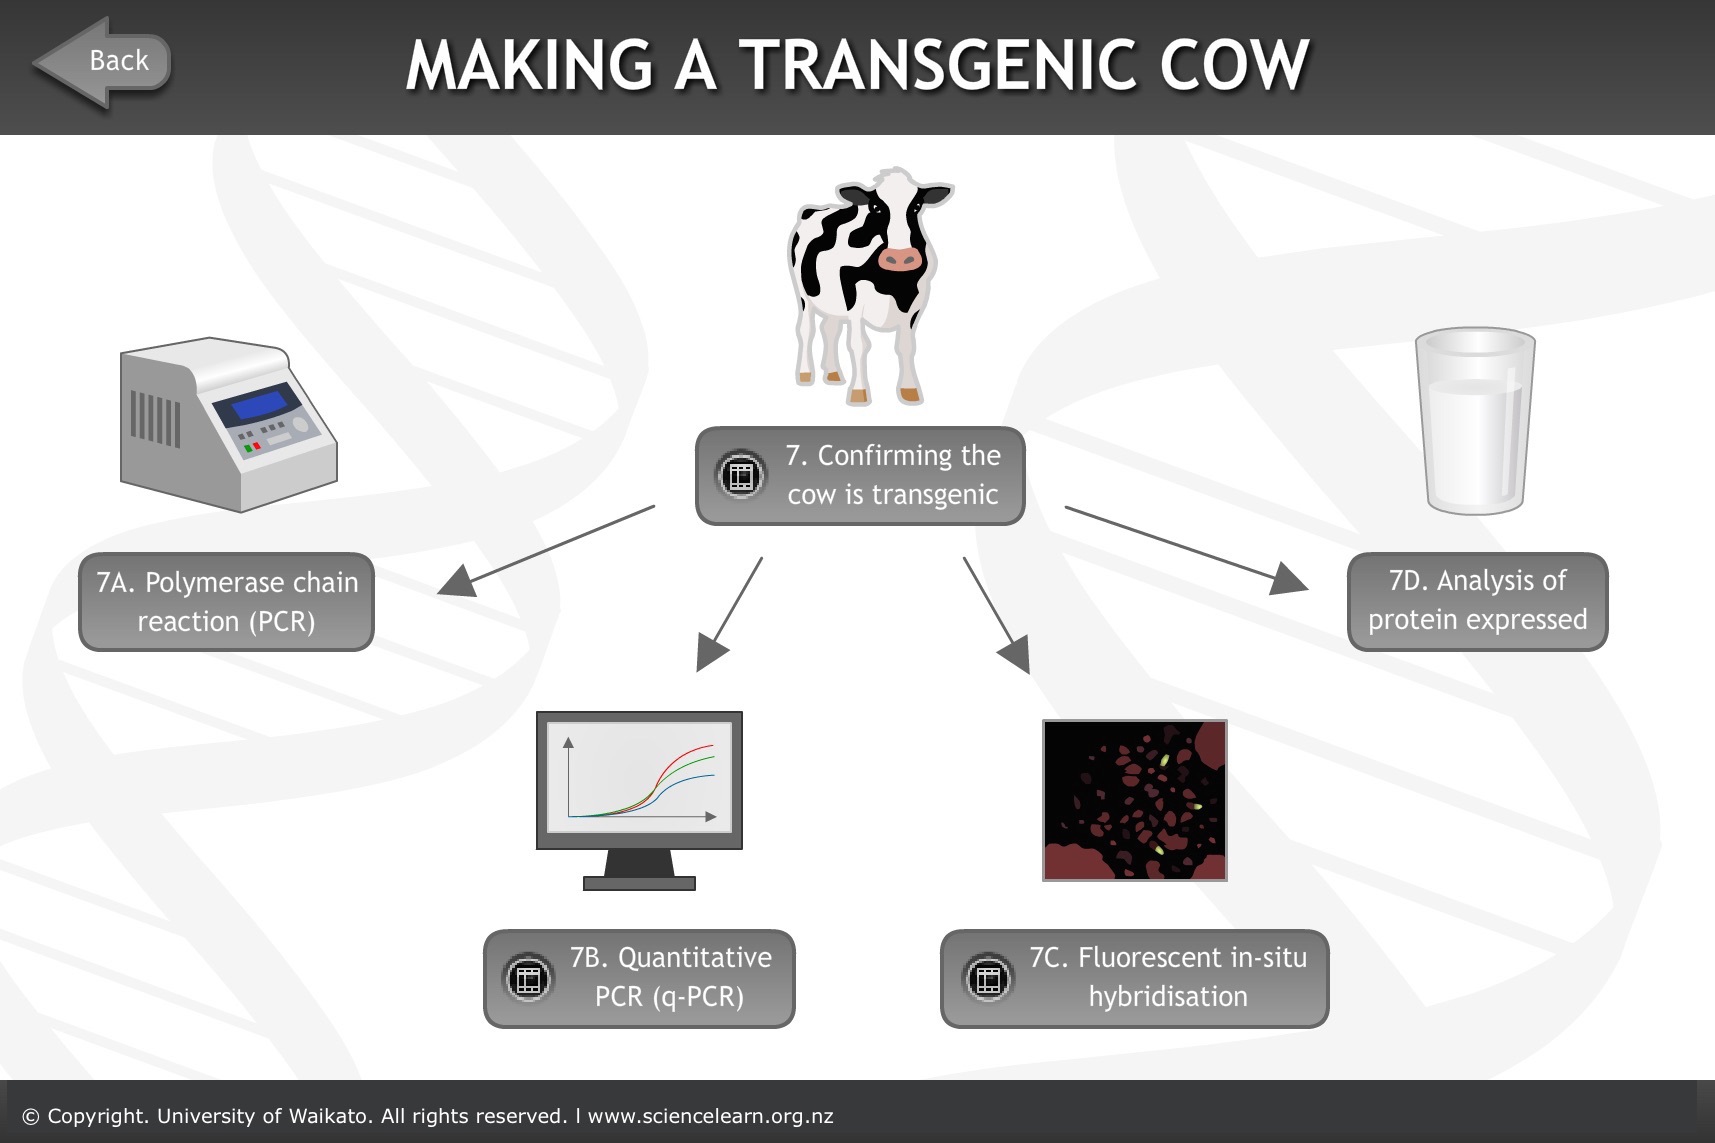 Techniques used to make transgenic cows — Science Learning Hub